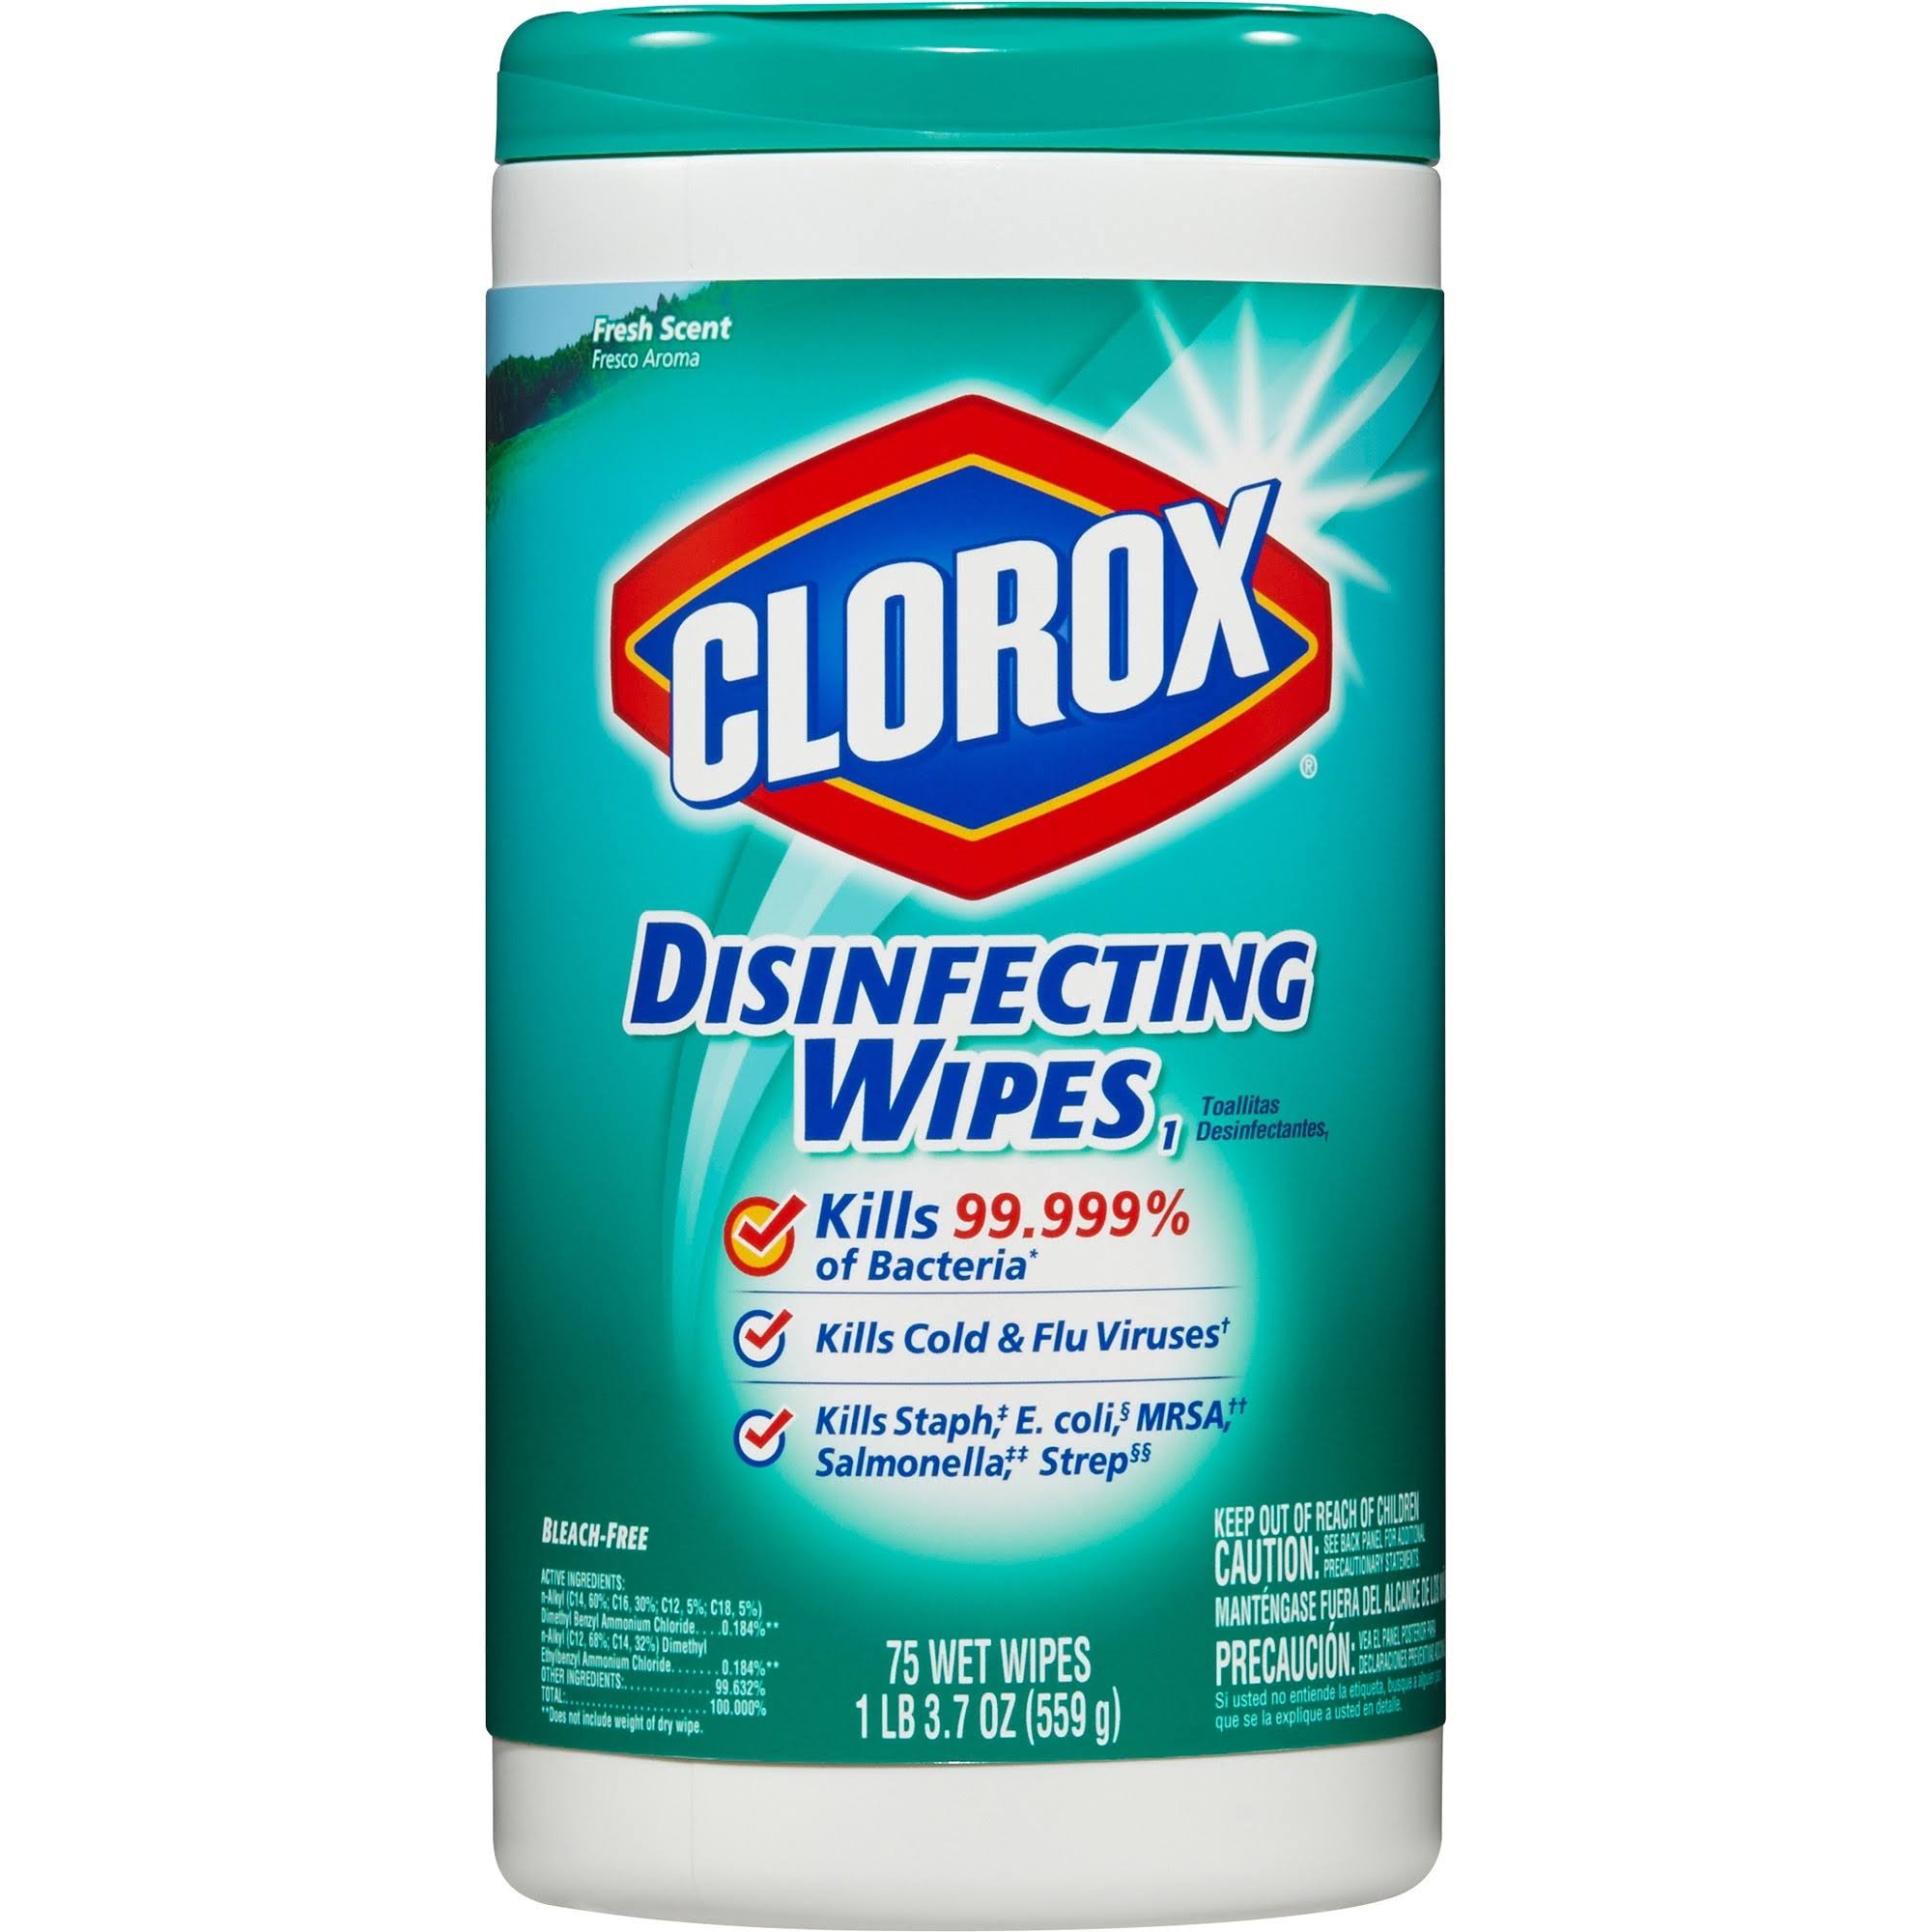 Clorox Fresh Scent Disinfecting Wet Wipes - 75 Wipes